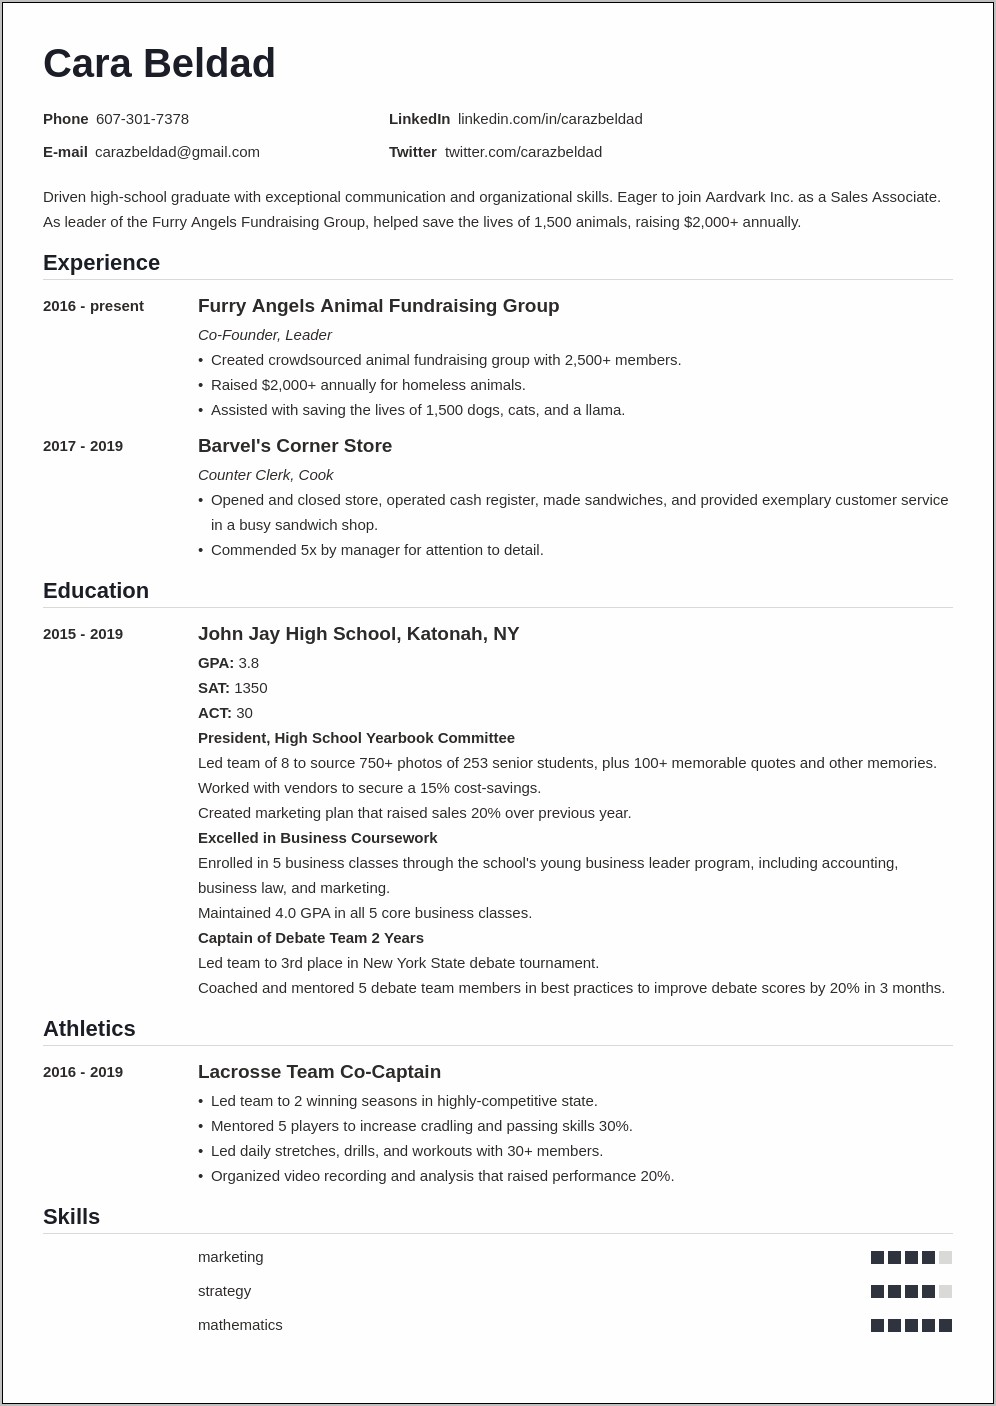 Resume Objective For High School Student First Job